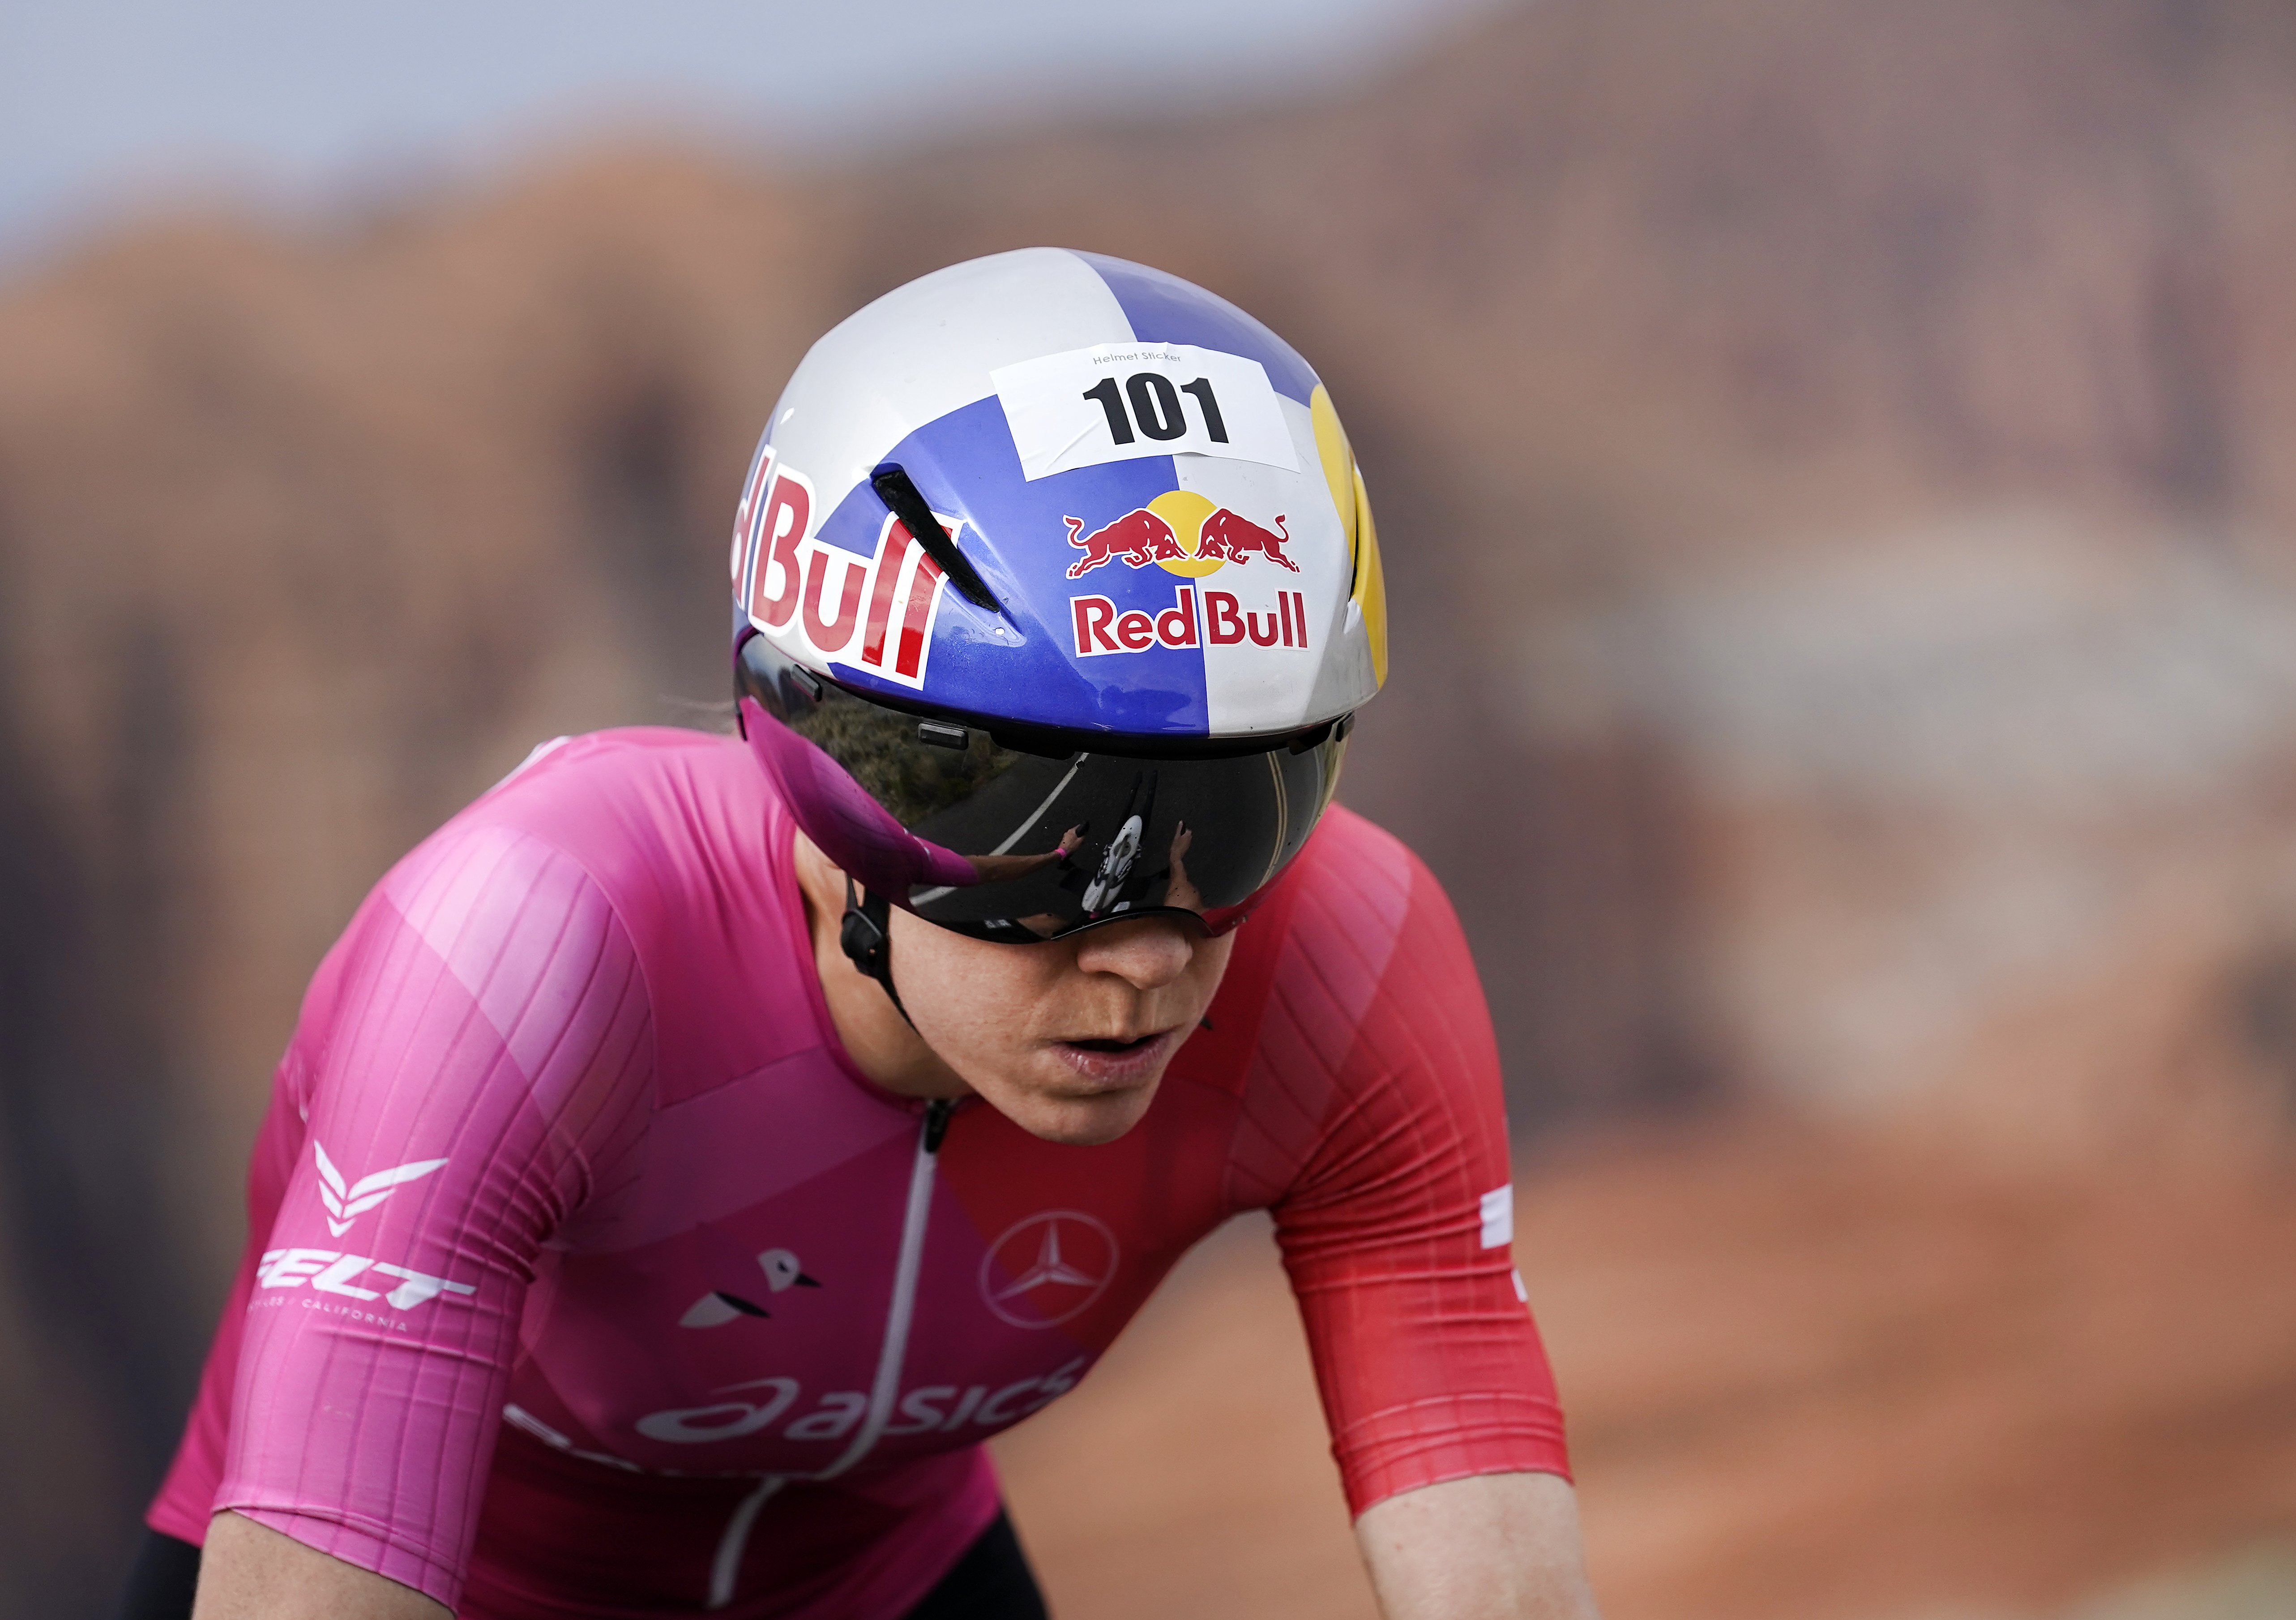 ST GEORGE, UTAH - SEPTEMBER 18: Daniela Ryf of Switzerland competes in the Women's Pro bike leg during the IRONMAN 70.3 World Championship on September 18, 2021 in St George, Utah. (Photo by Patrick McDermott/Getty Images for IRONMAN)